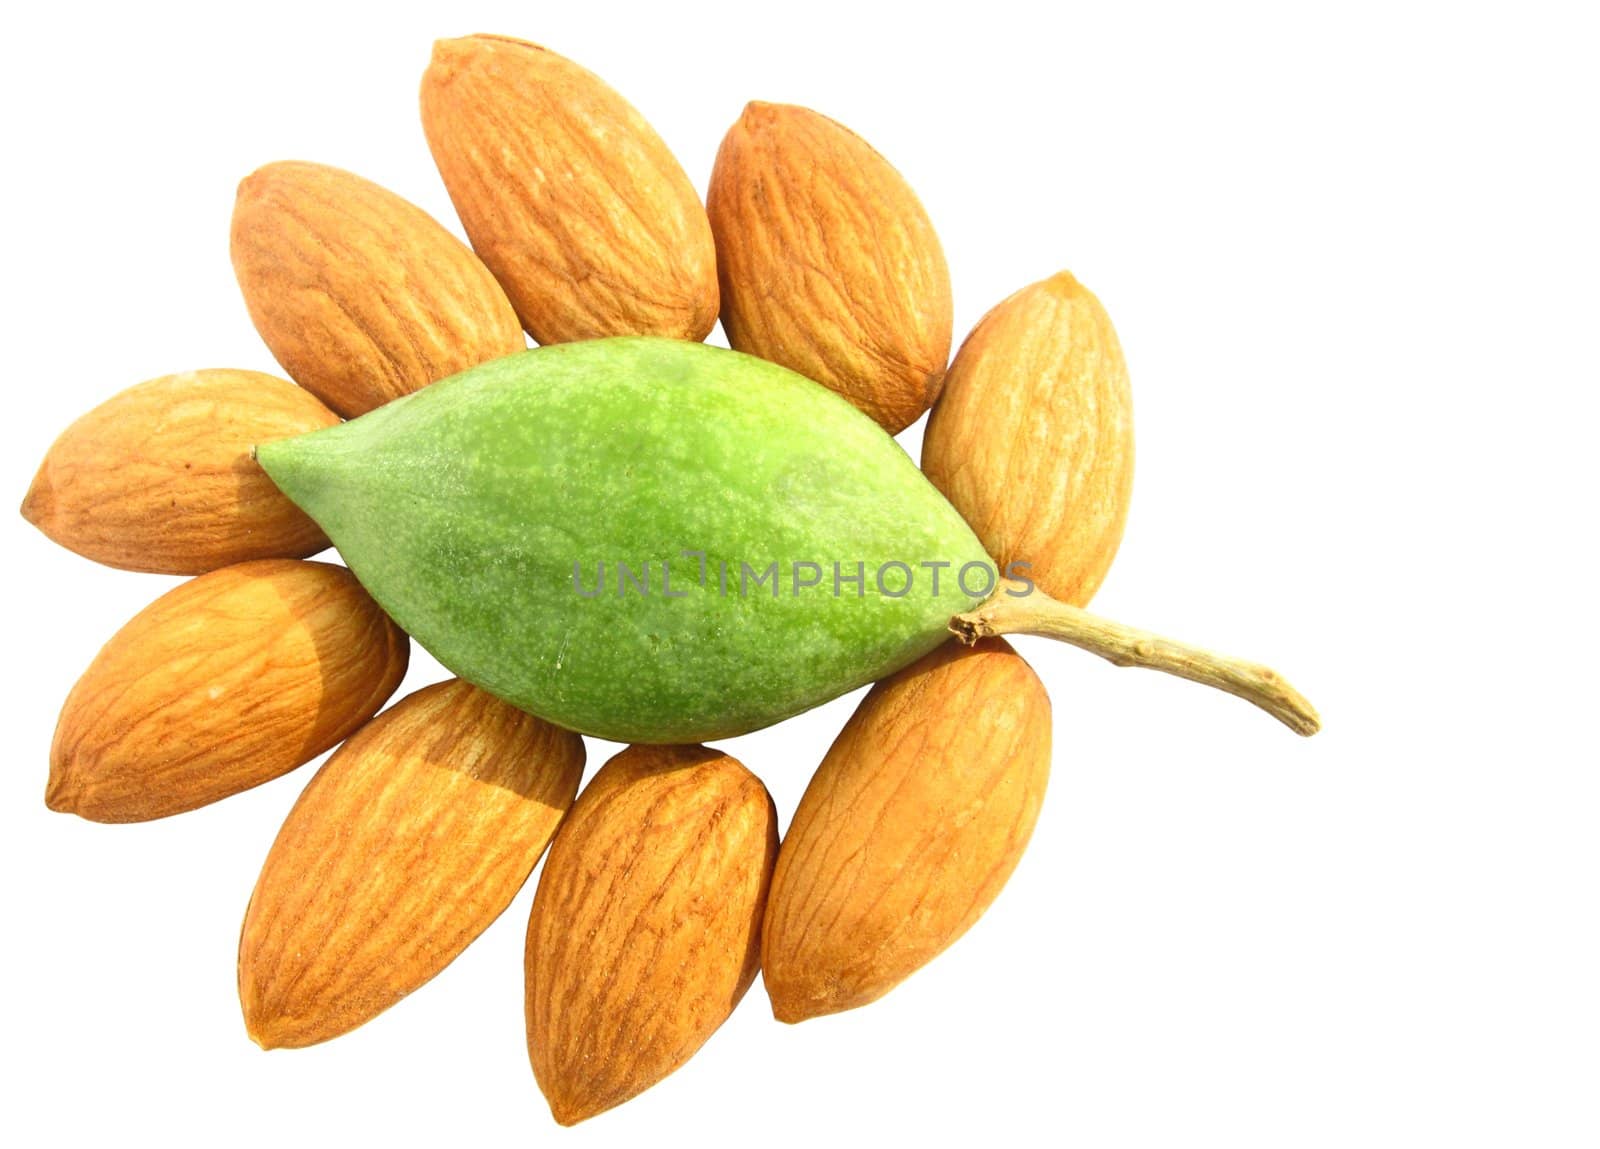 decorative arrangements of group of almond nuts with one raw green almond in middle 